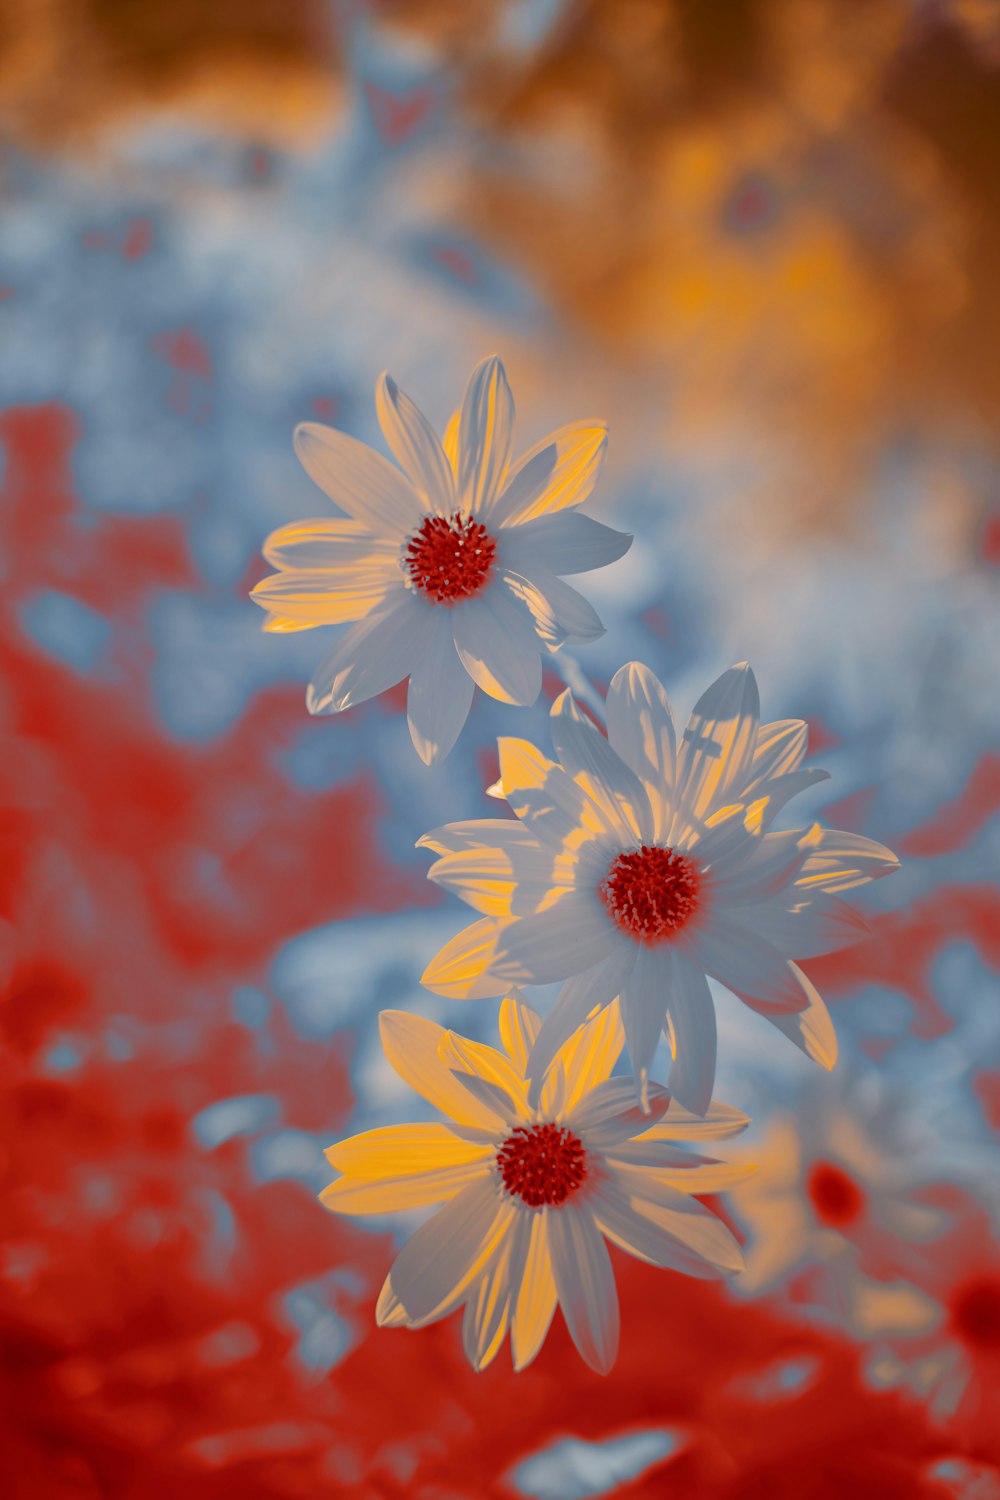 white and red daisy flowers in bloom during daytime